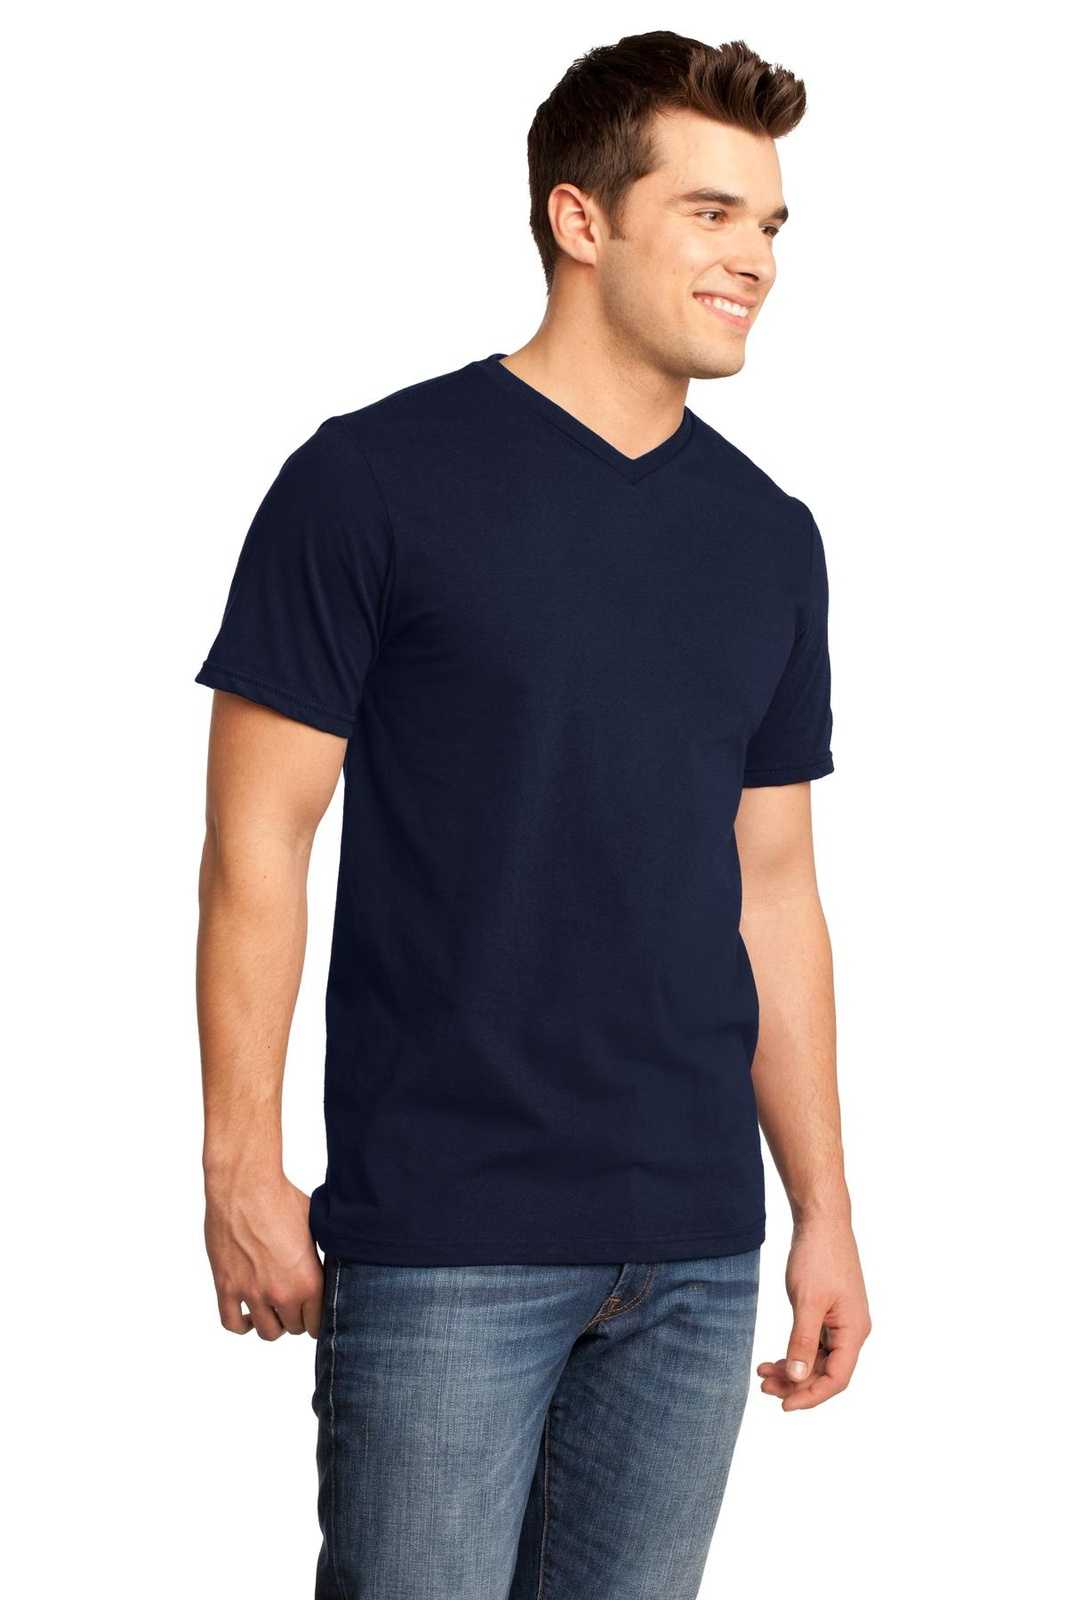 District DT6500 Very Important Tee V-Neck - New Navy - HIT a Double - 4